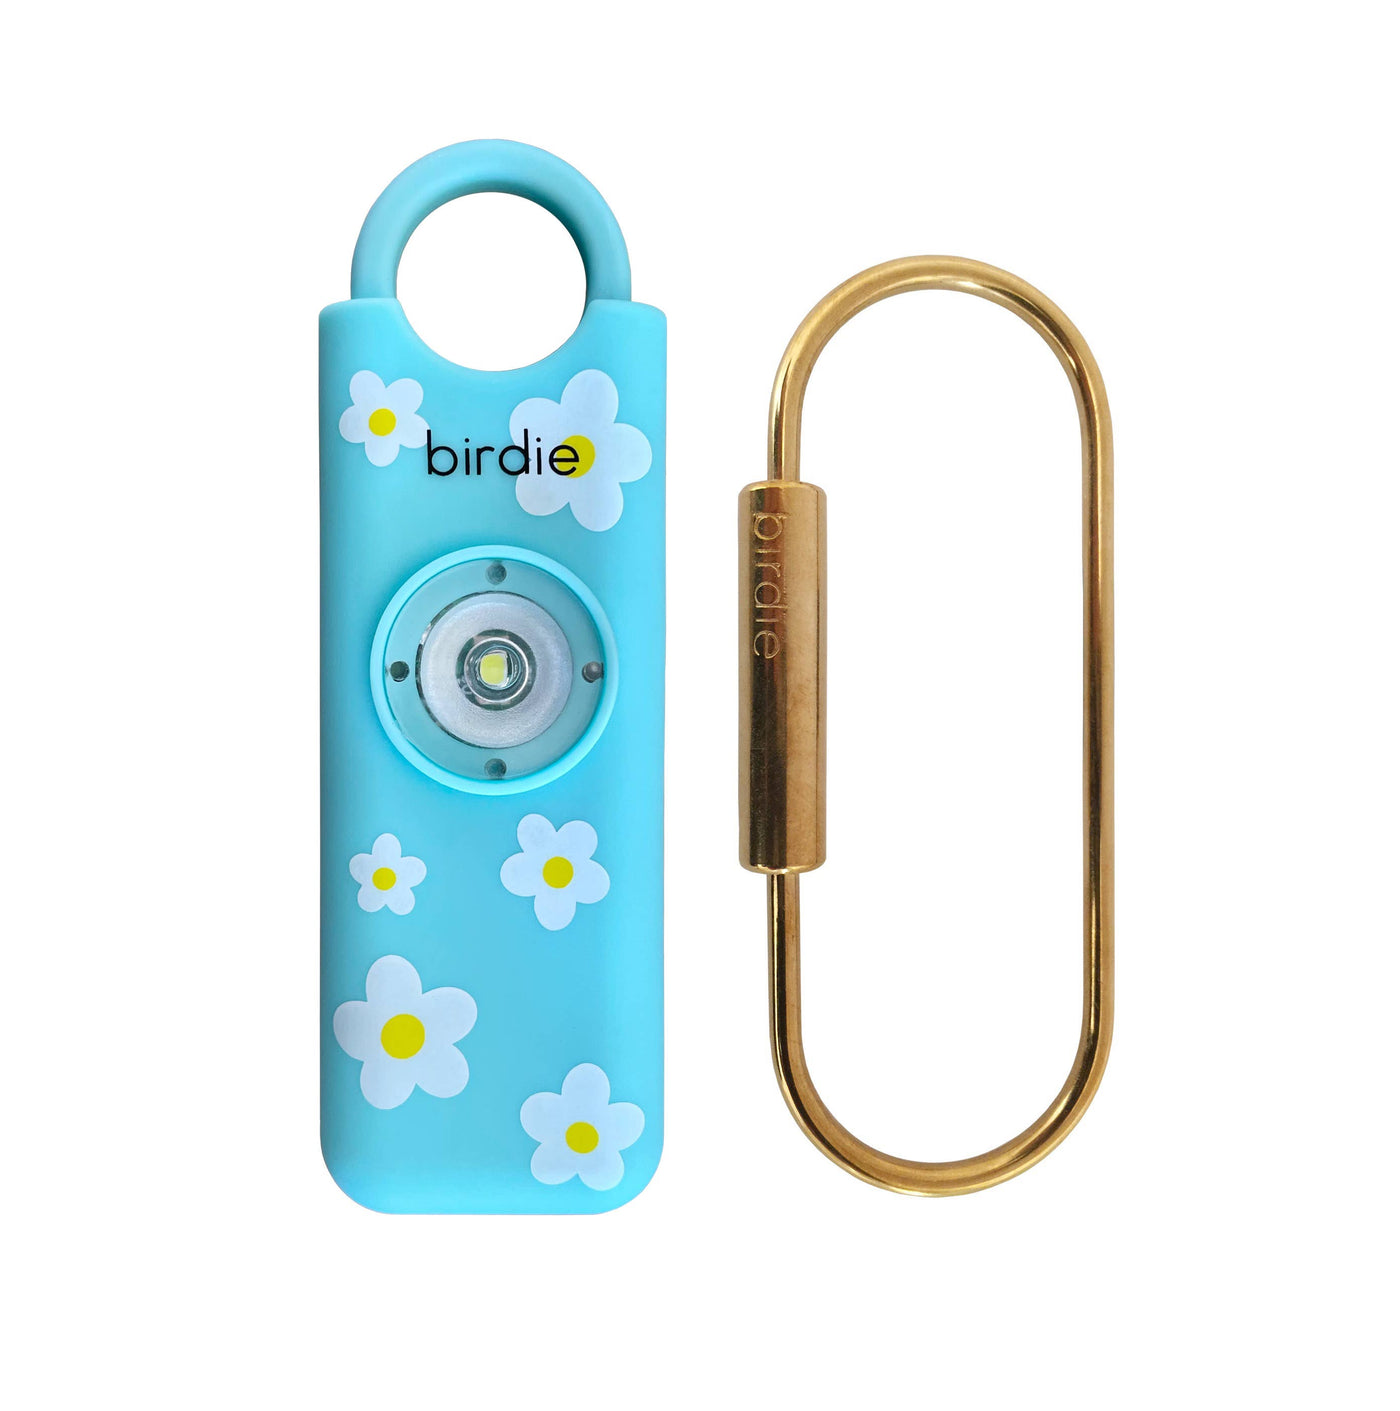 She's Birdie Personal Safety Alarm: Single / Blossom